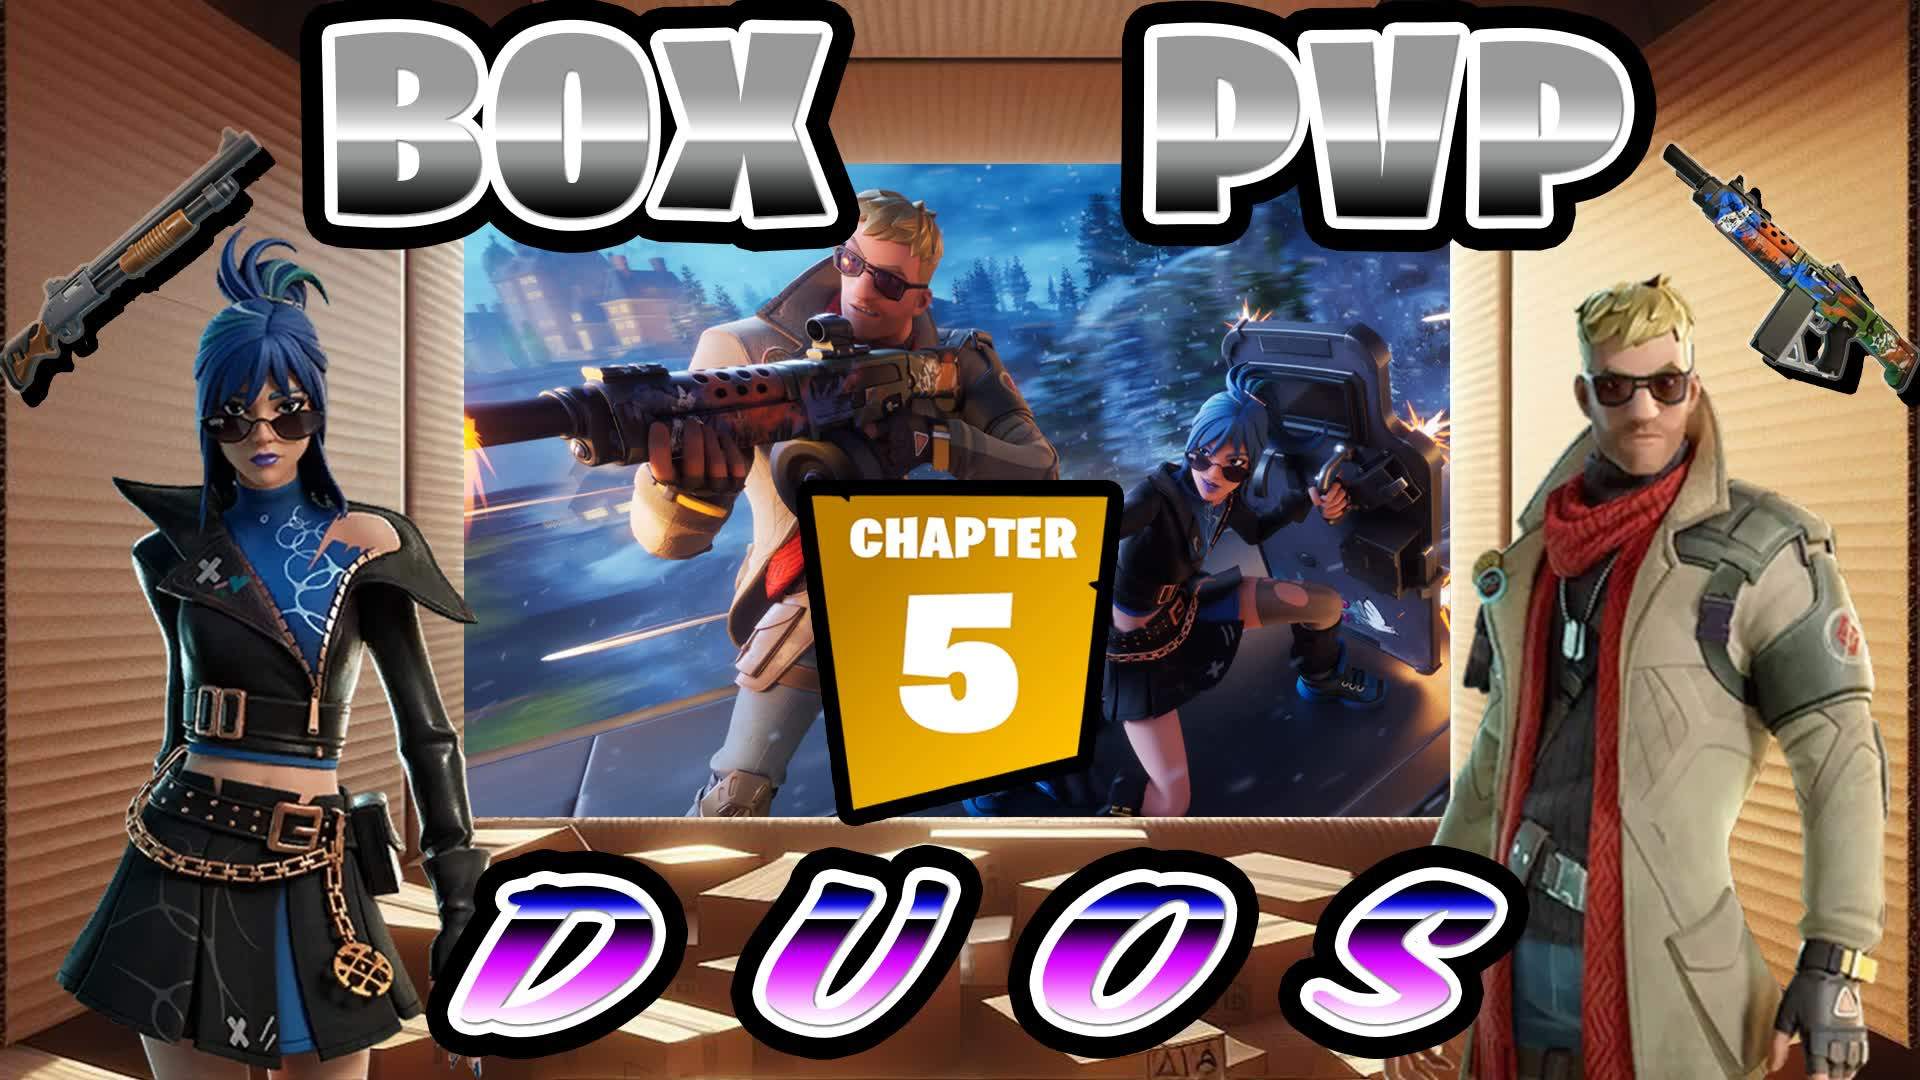 CHAPTER 5 BOX PVP-DUOS